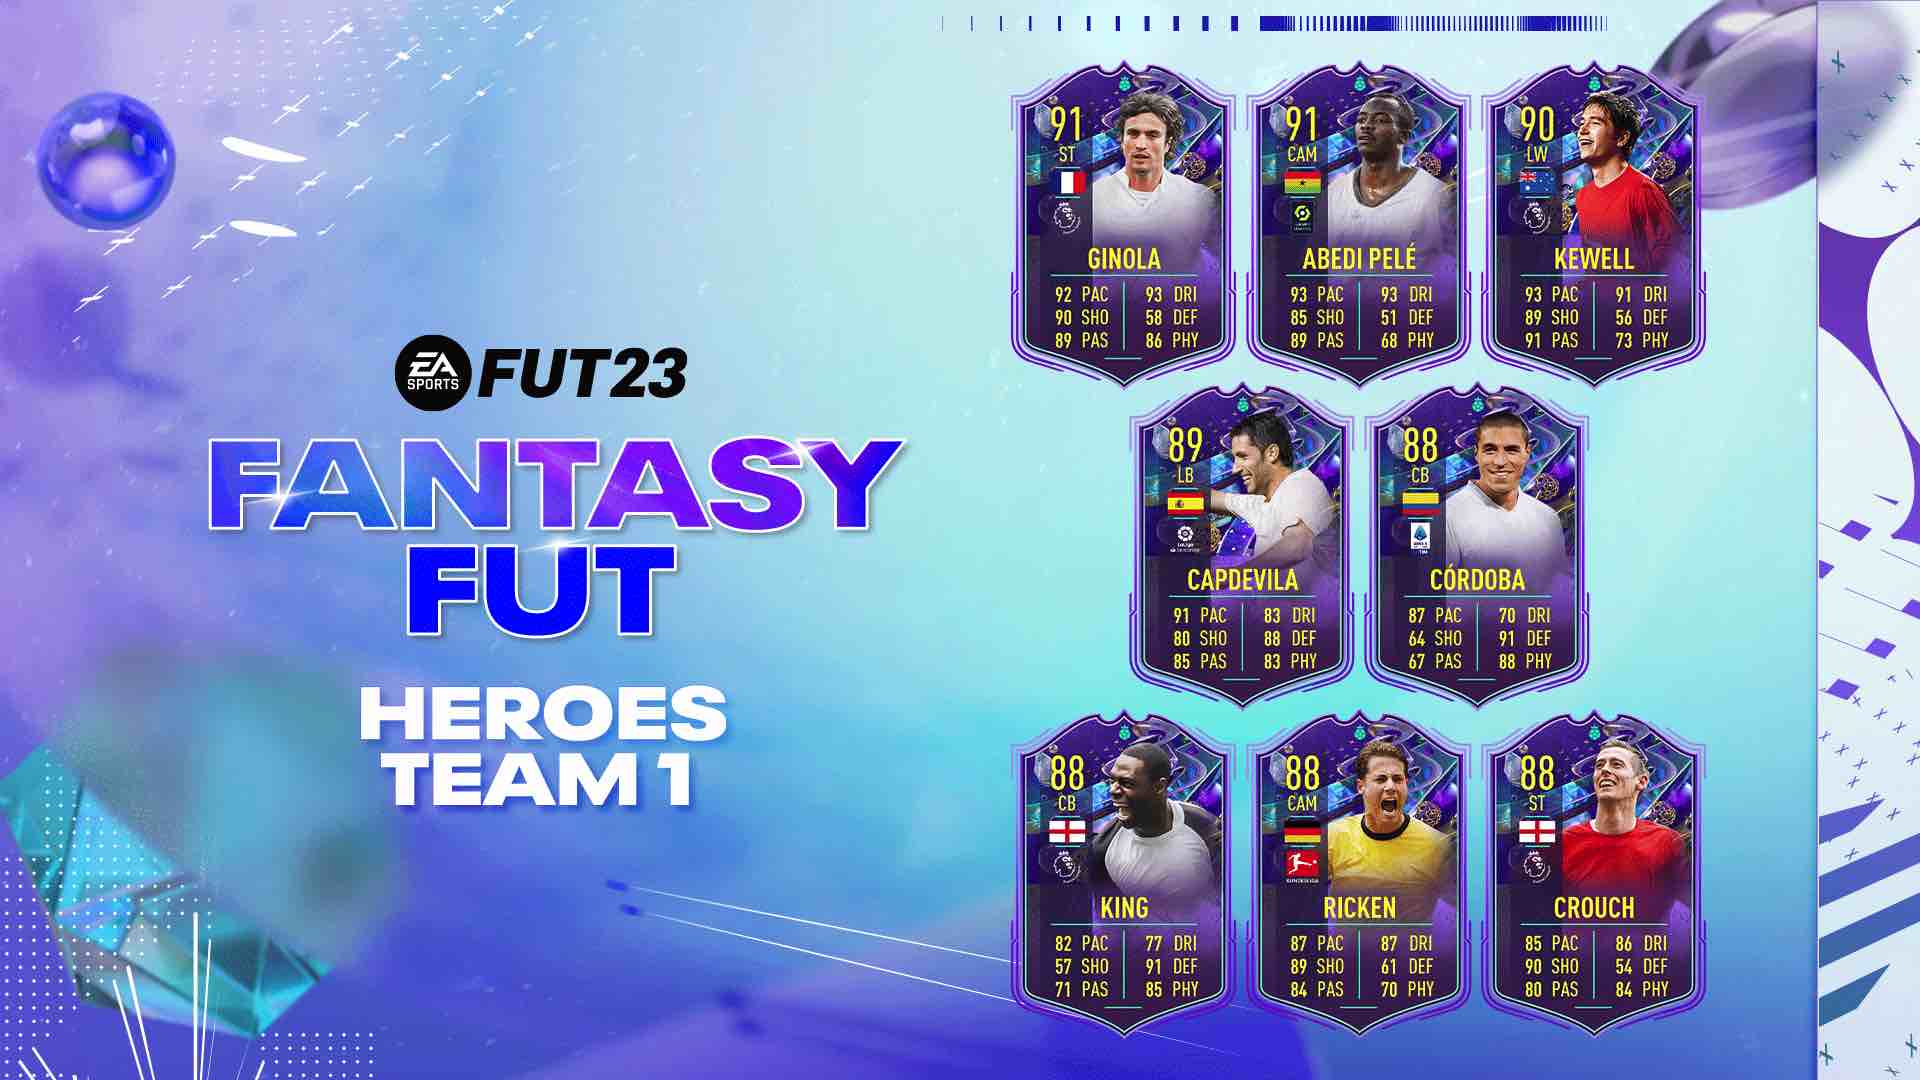 *UPDATED* FIFA 23 FUT Fantasy Squad and Hero Cards Revealed